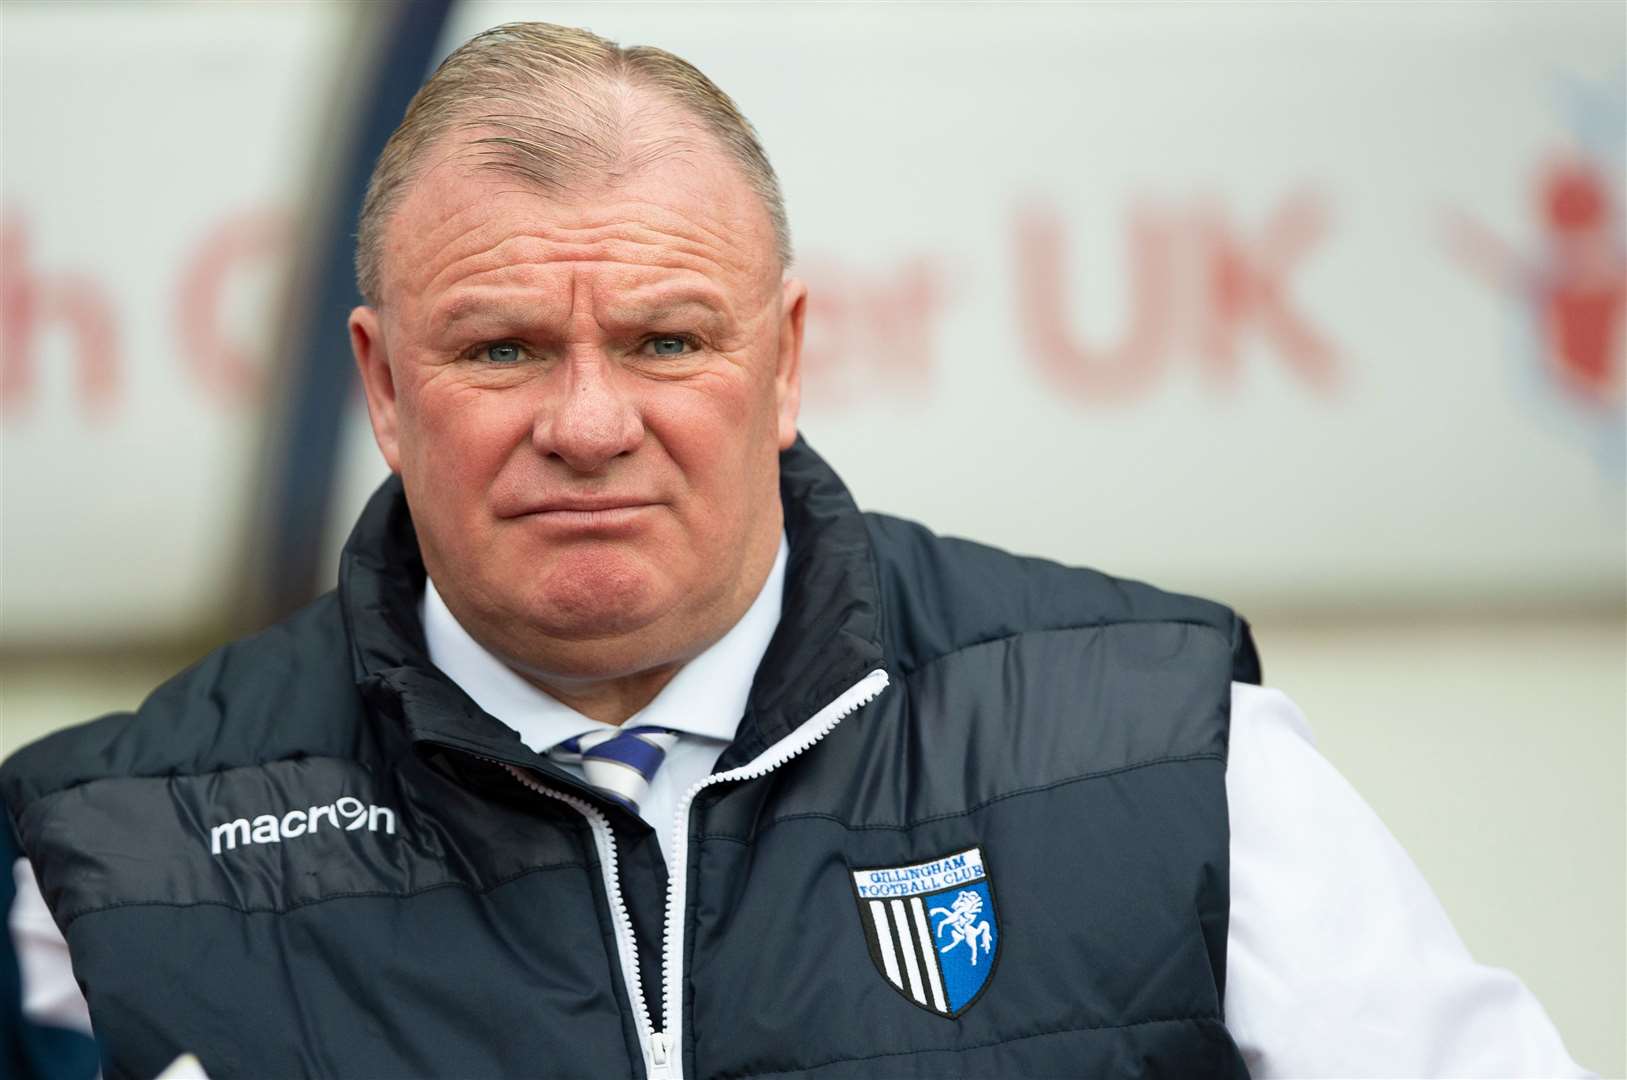 Gillingham manager Steve Evans sends his team out for one last game this weekend before a tough season comes to an end